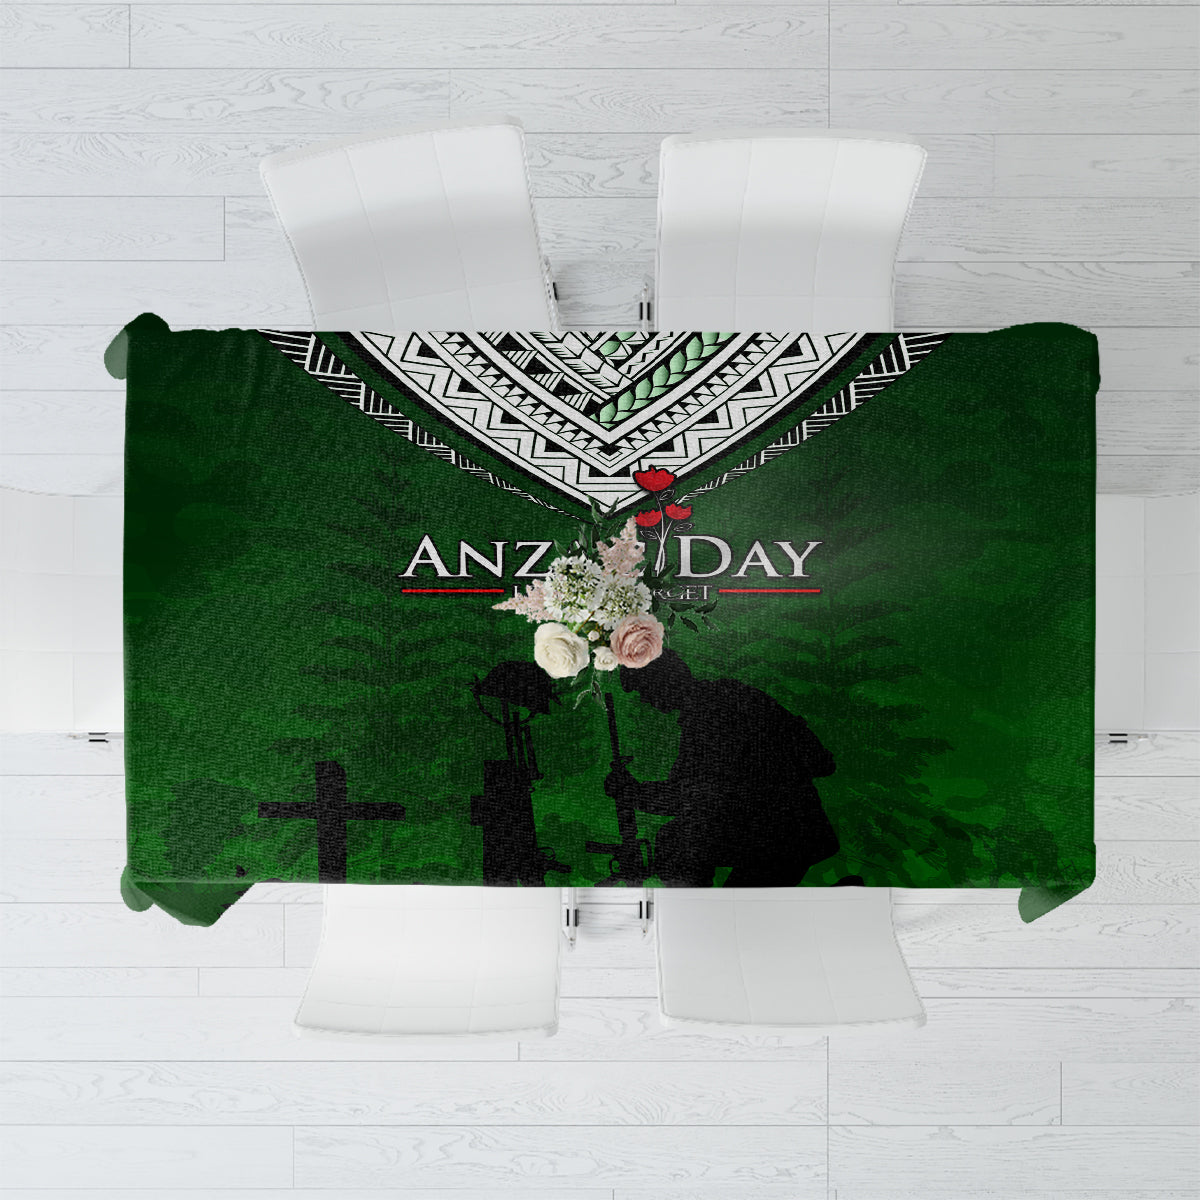 Norfolk Island ANZAC Day Tablecloth Soldier Lest We Forget Camouflage LT03 Green - Polynesian Pride